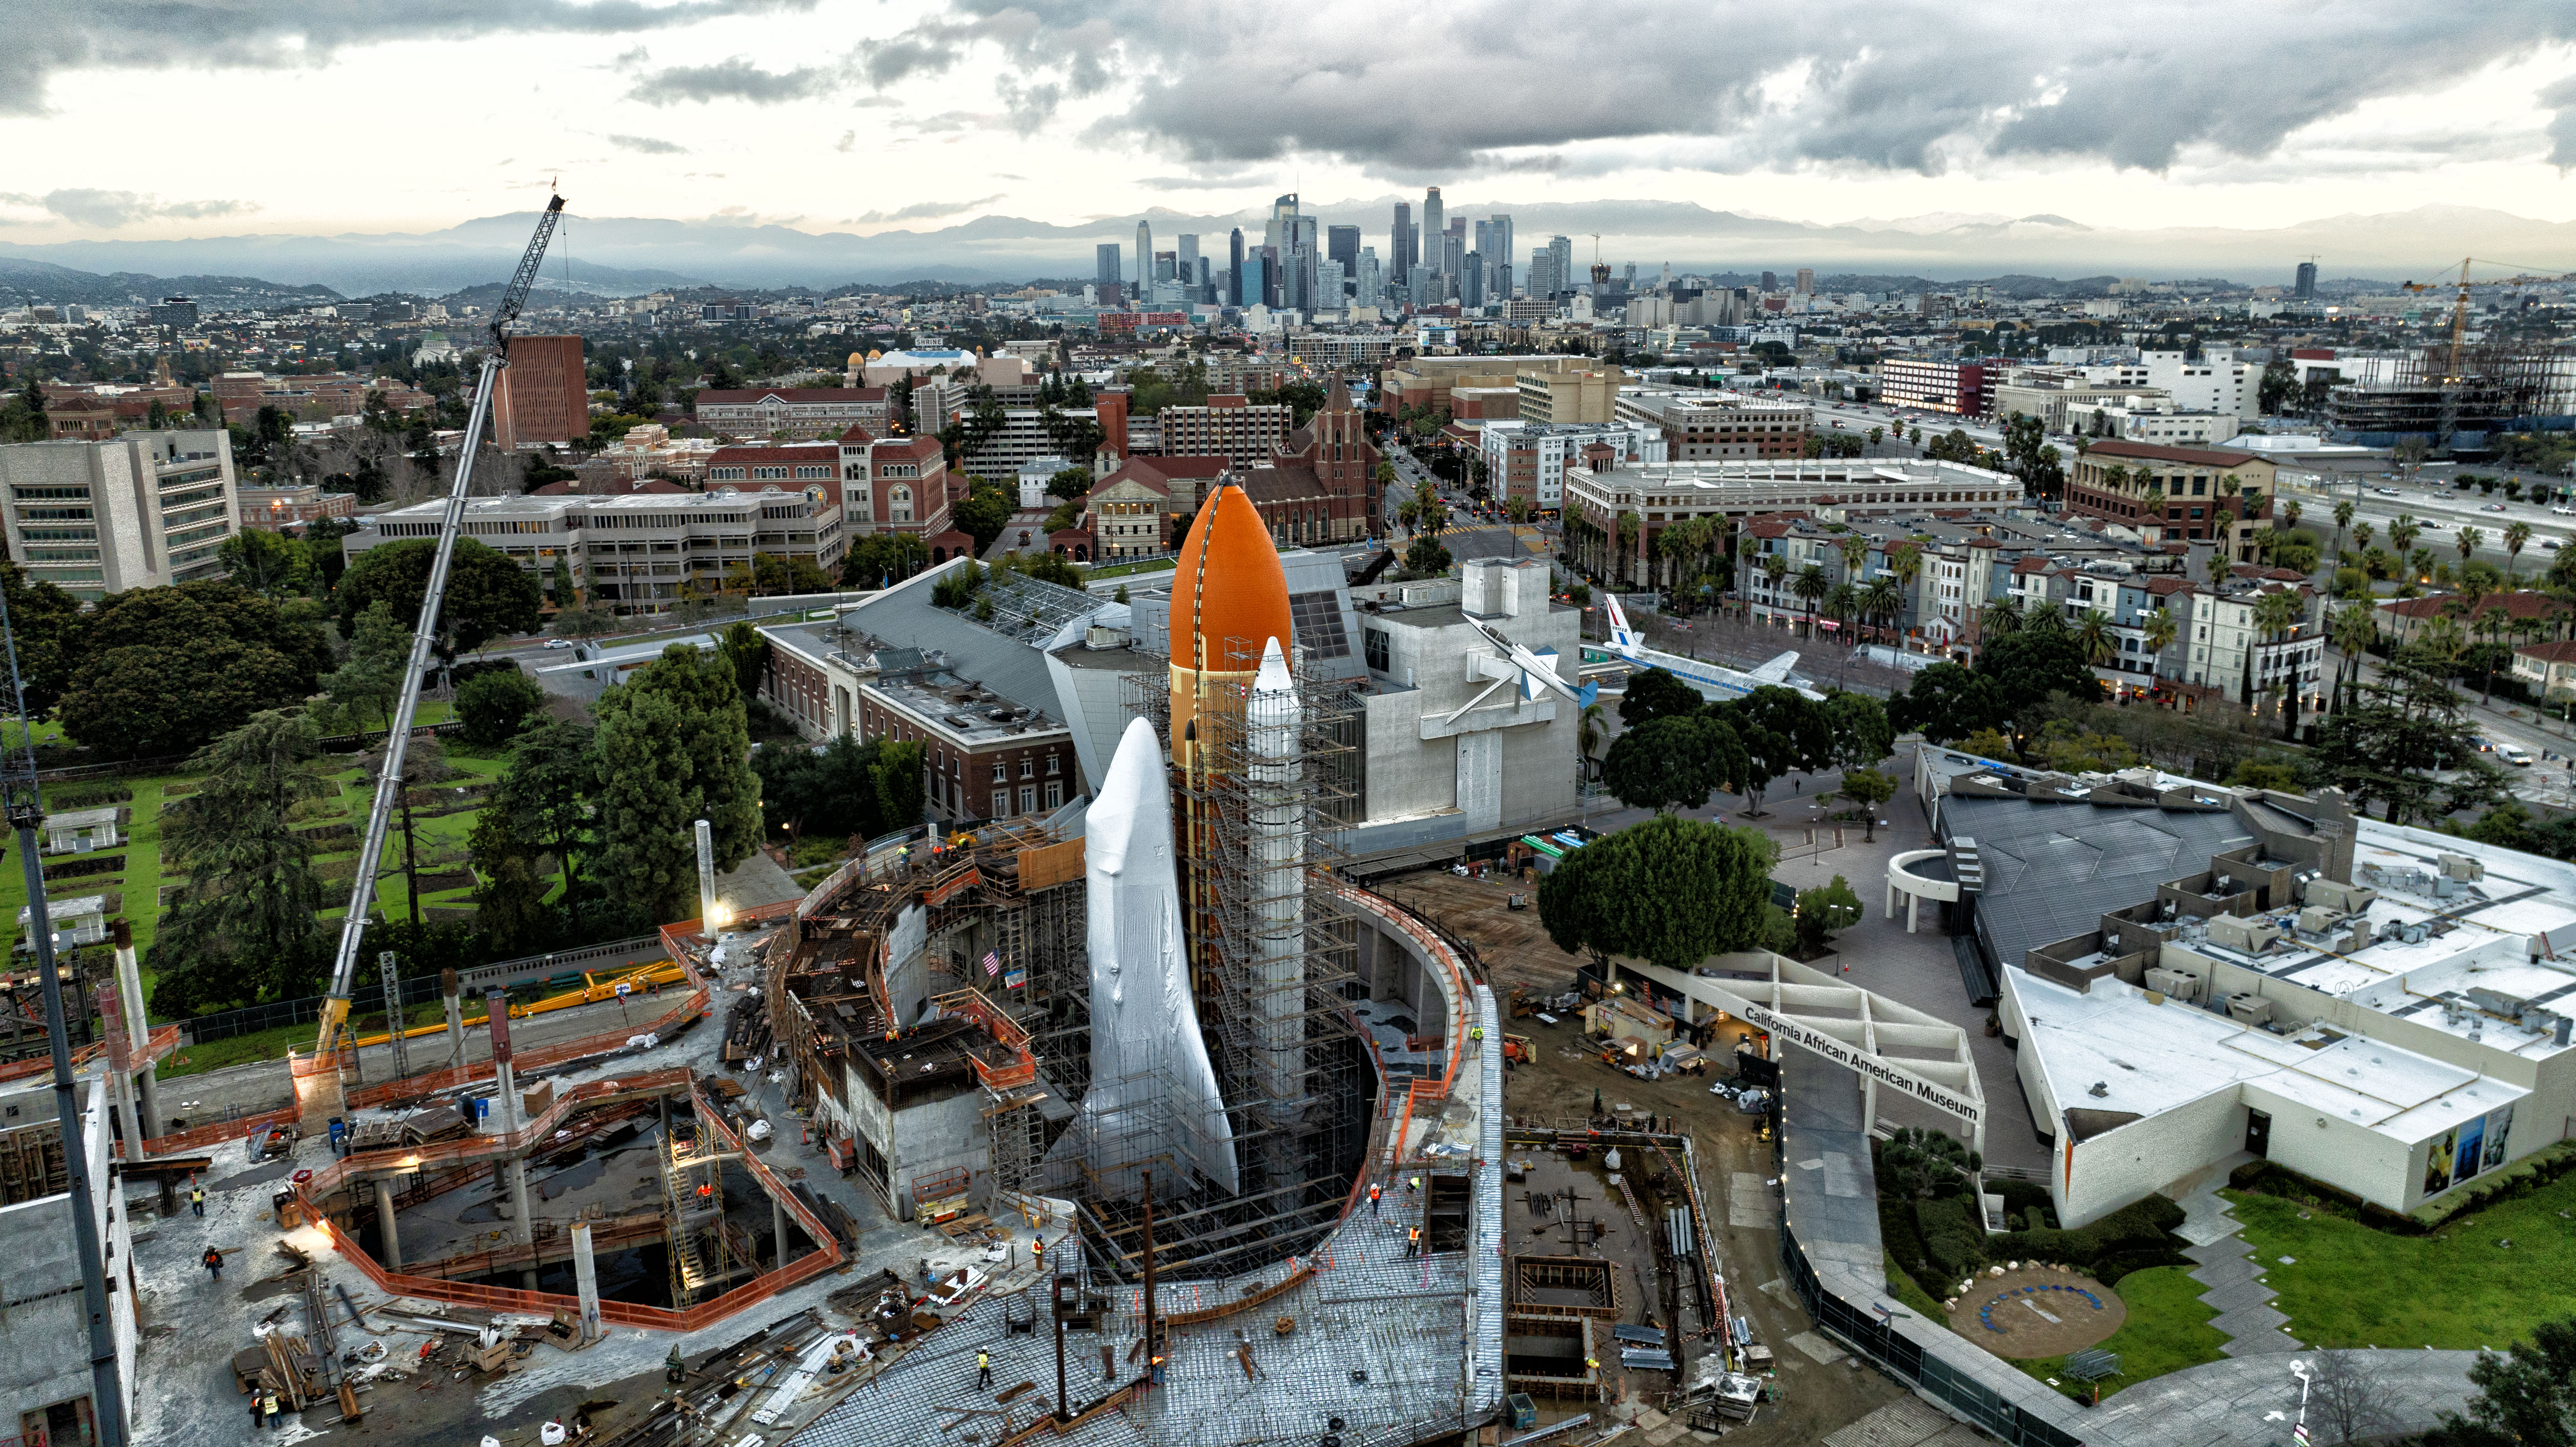 Aerial shot of full space shuttle stack in the future Samuel Oschin Air and Space Center with downtown downtown LA skyline  and gray clouds in the background.